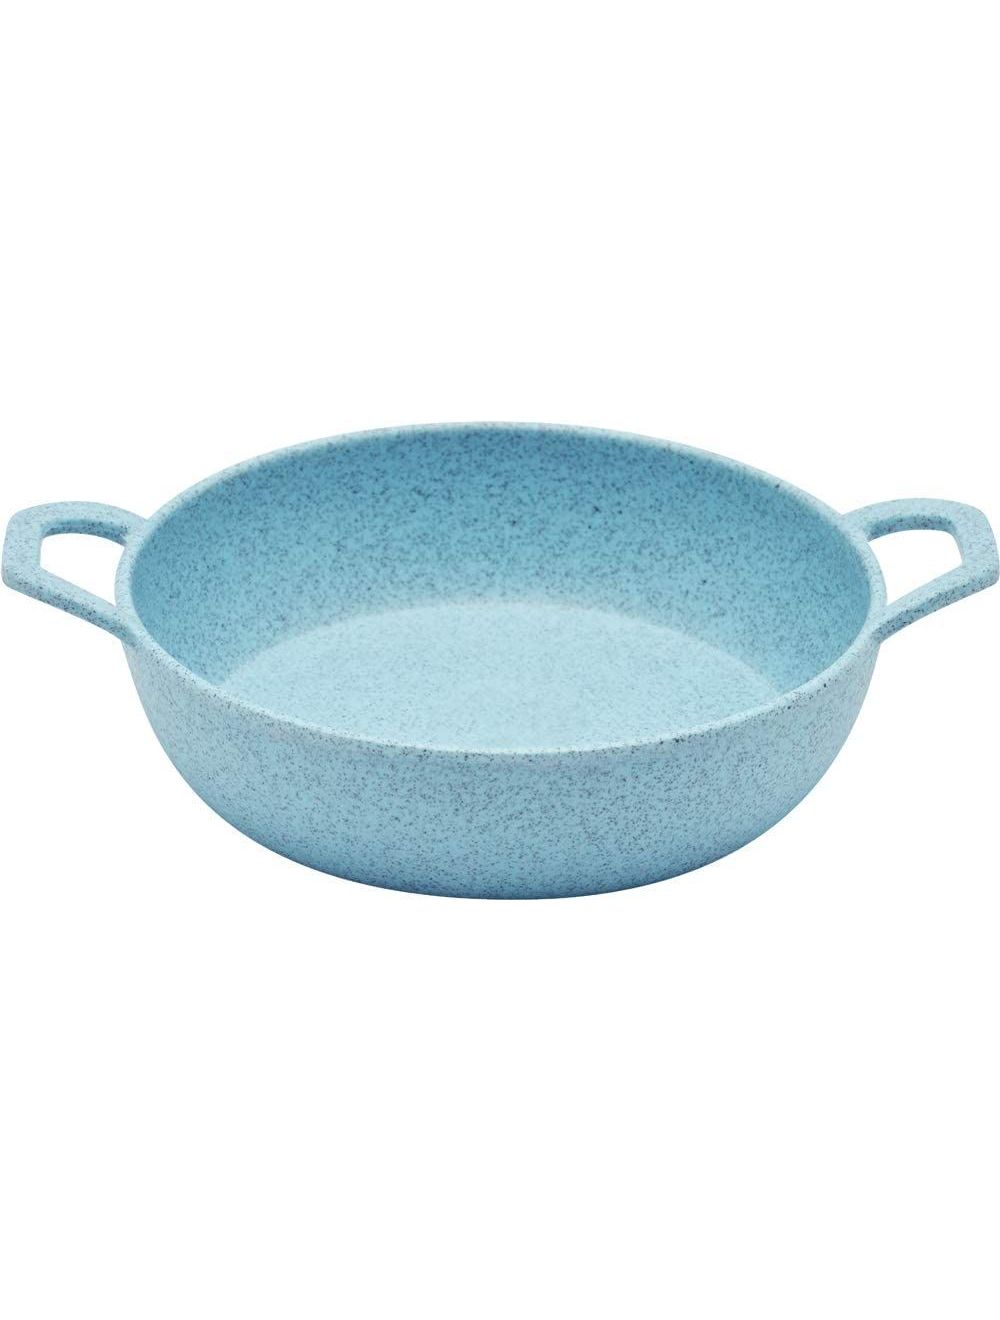 Dinewell Melamine Serving Bowl Blue Speckle-5.5 inch-DWMB0164BS